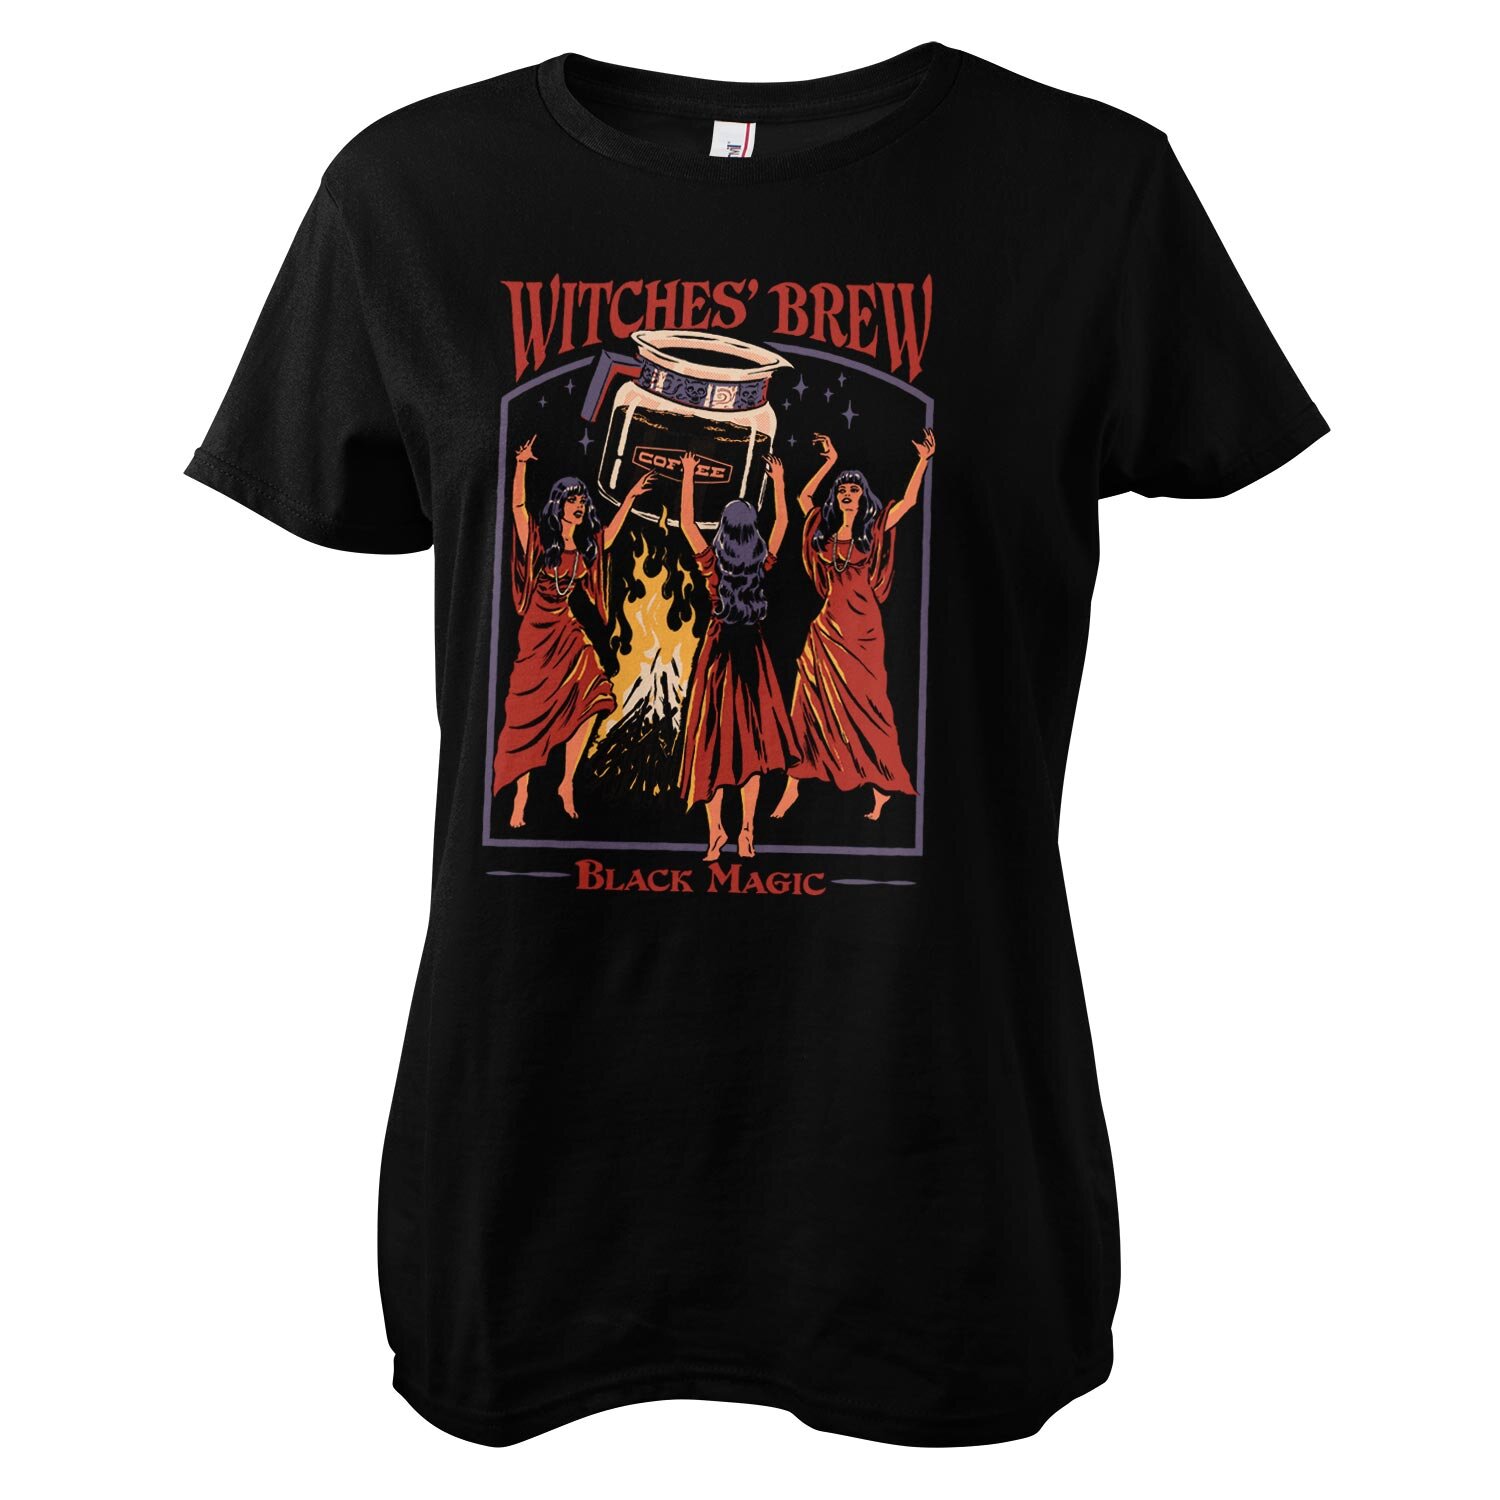 Witches Brew Black Magic Girly Tee